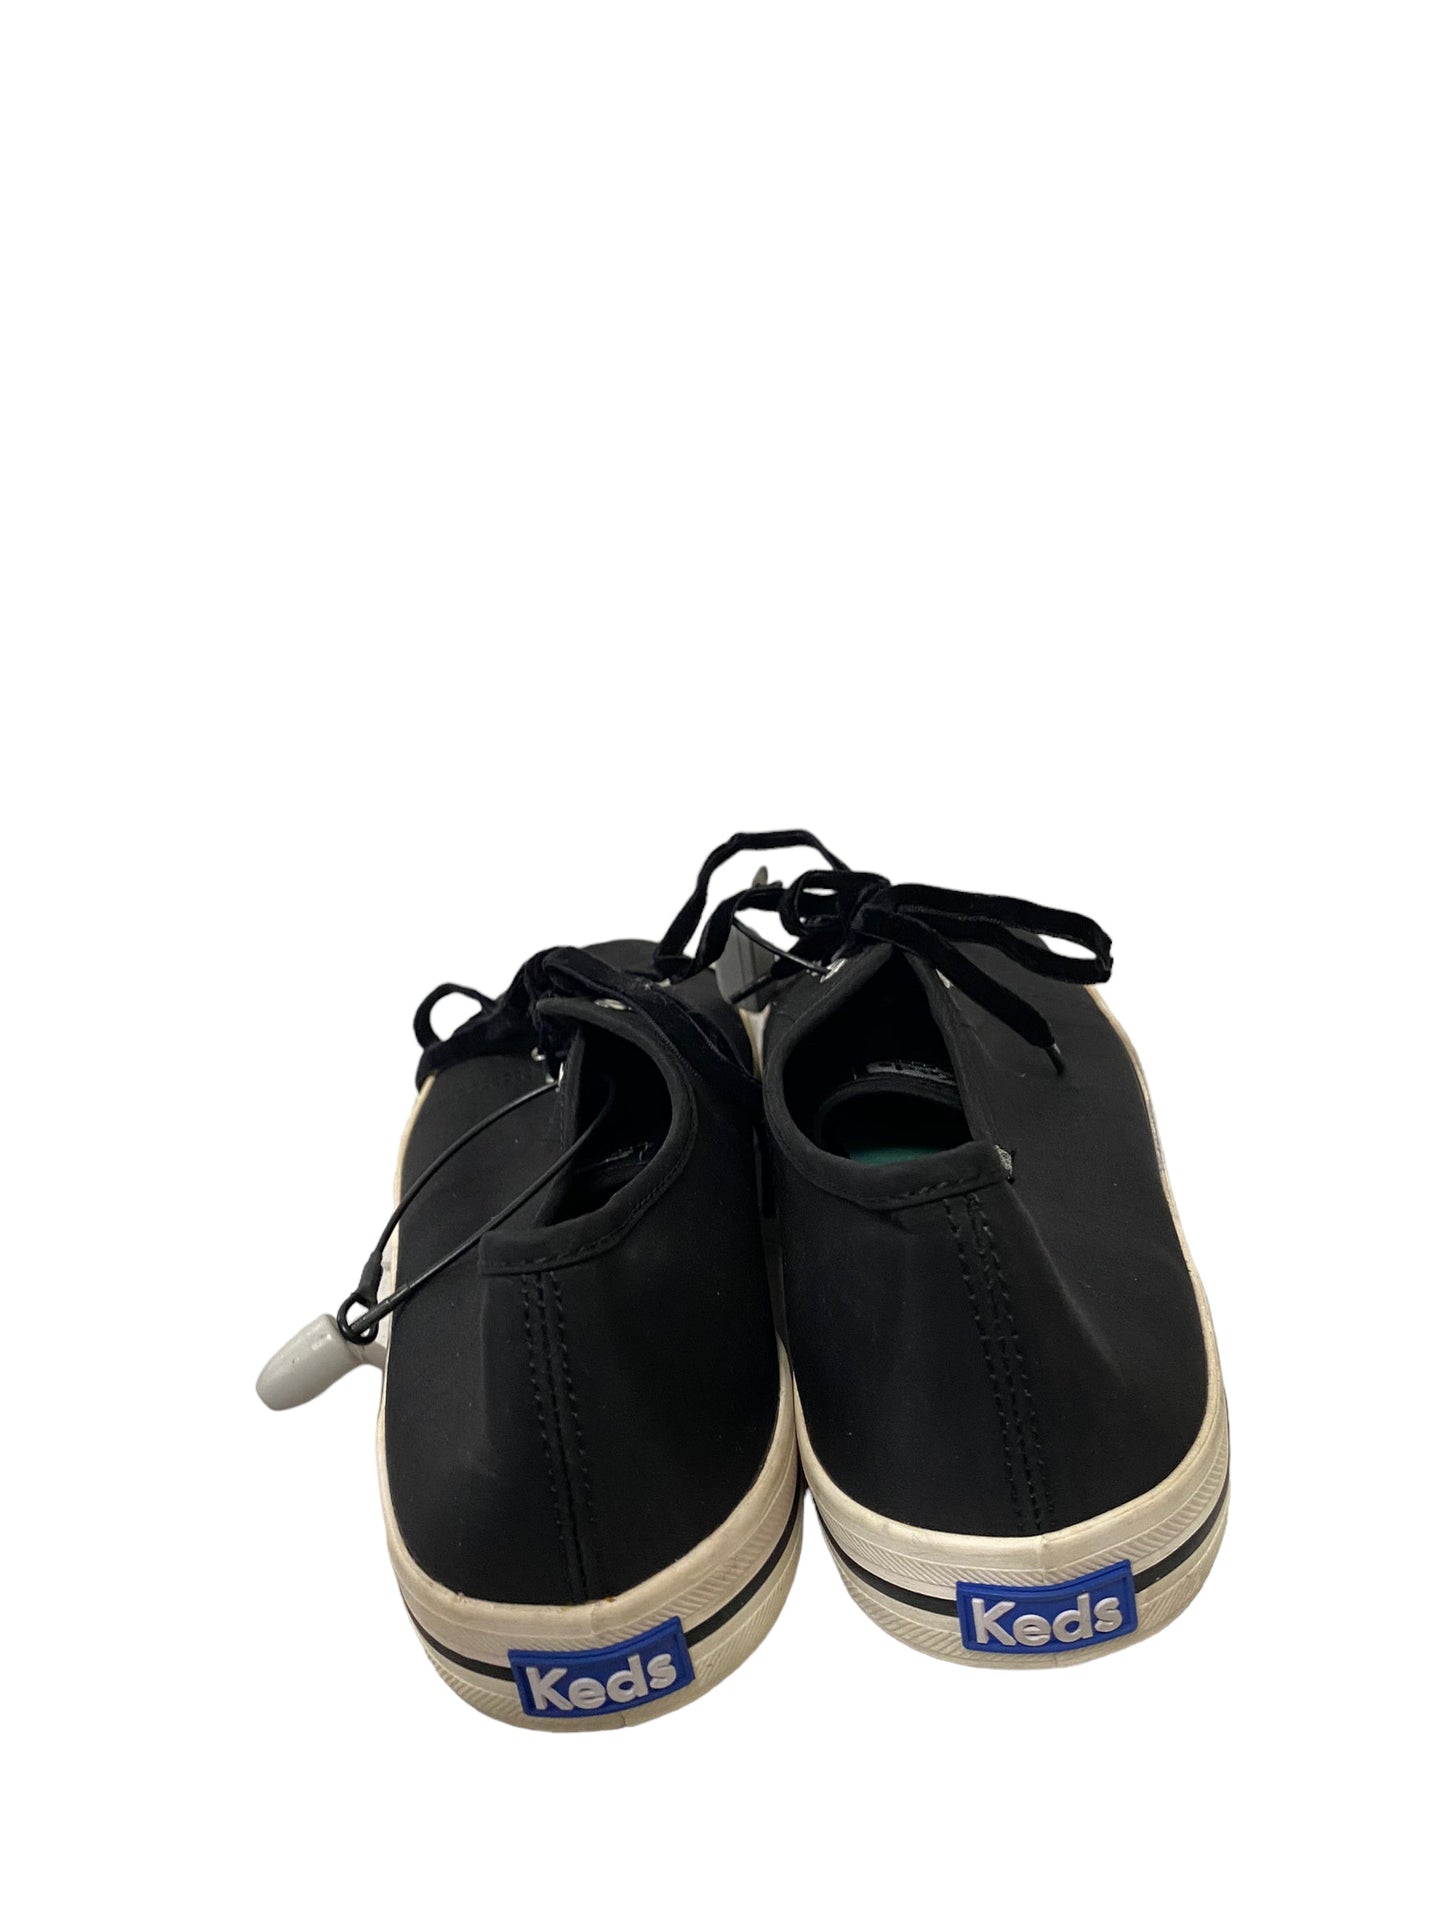 Shoes Flats Boat By Keds  Size: 11